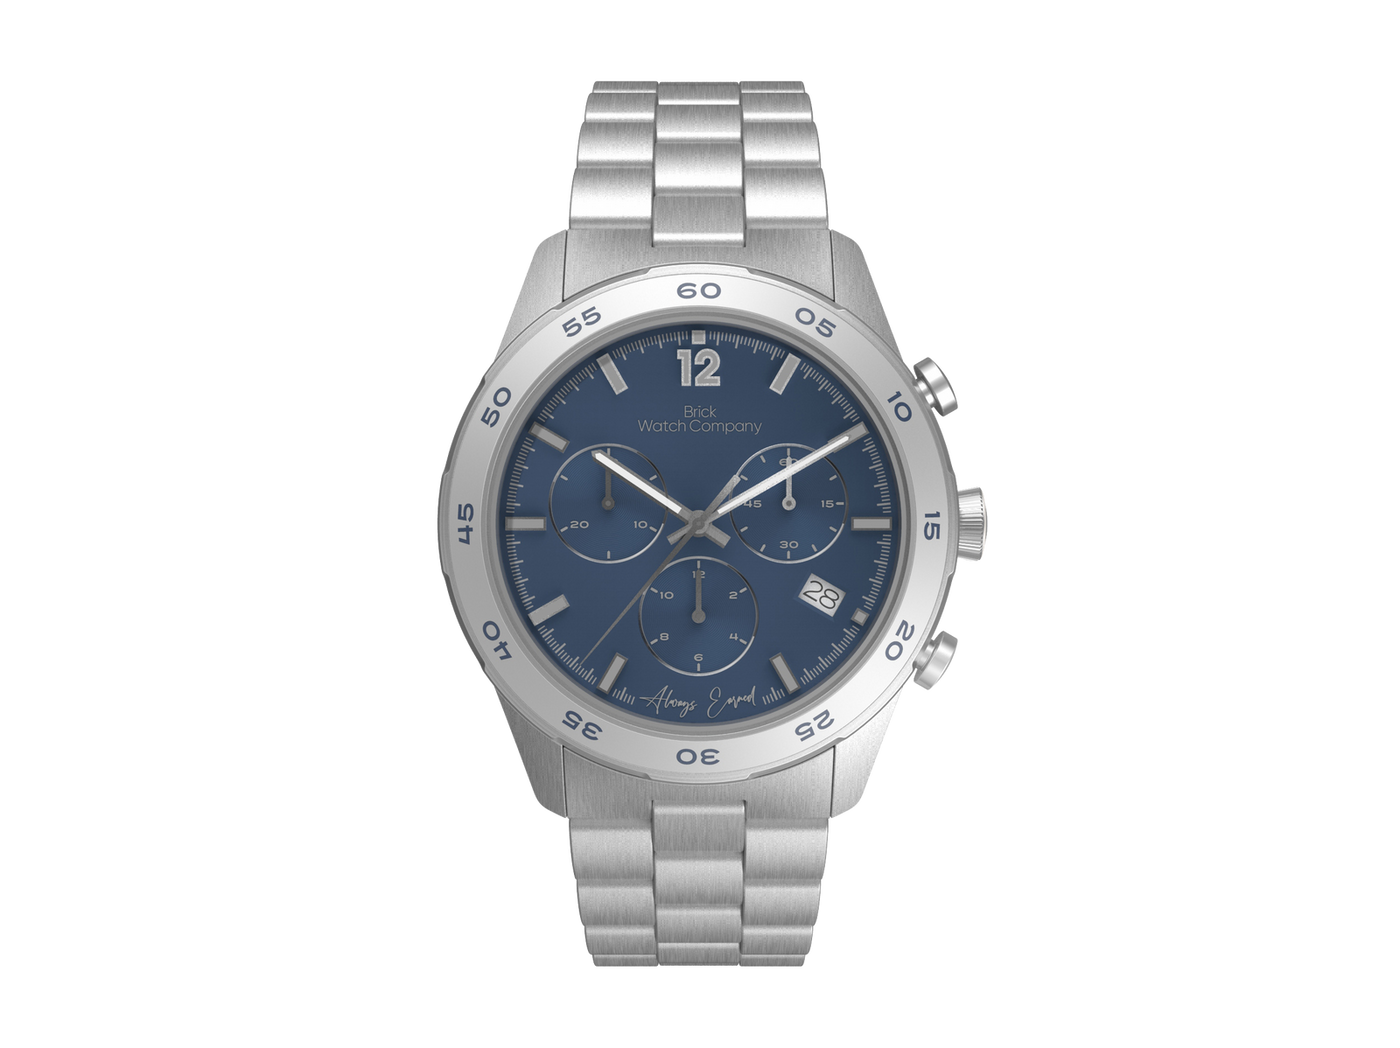 Chrono-Diver - Silver Case, Navy Dial, Gray Lumi Numbers